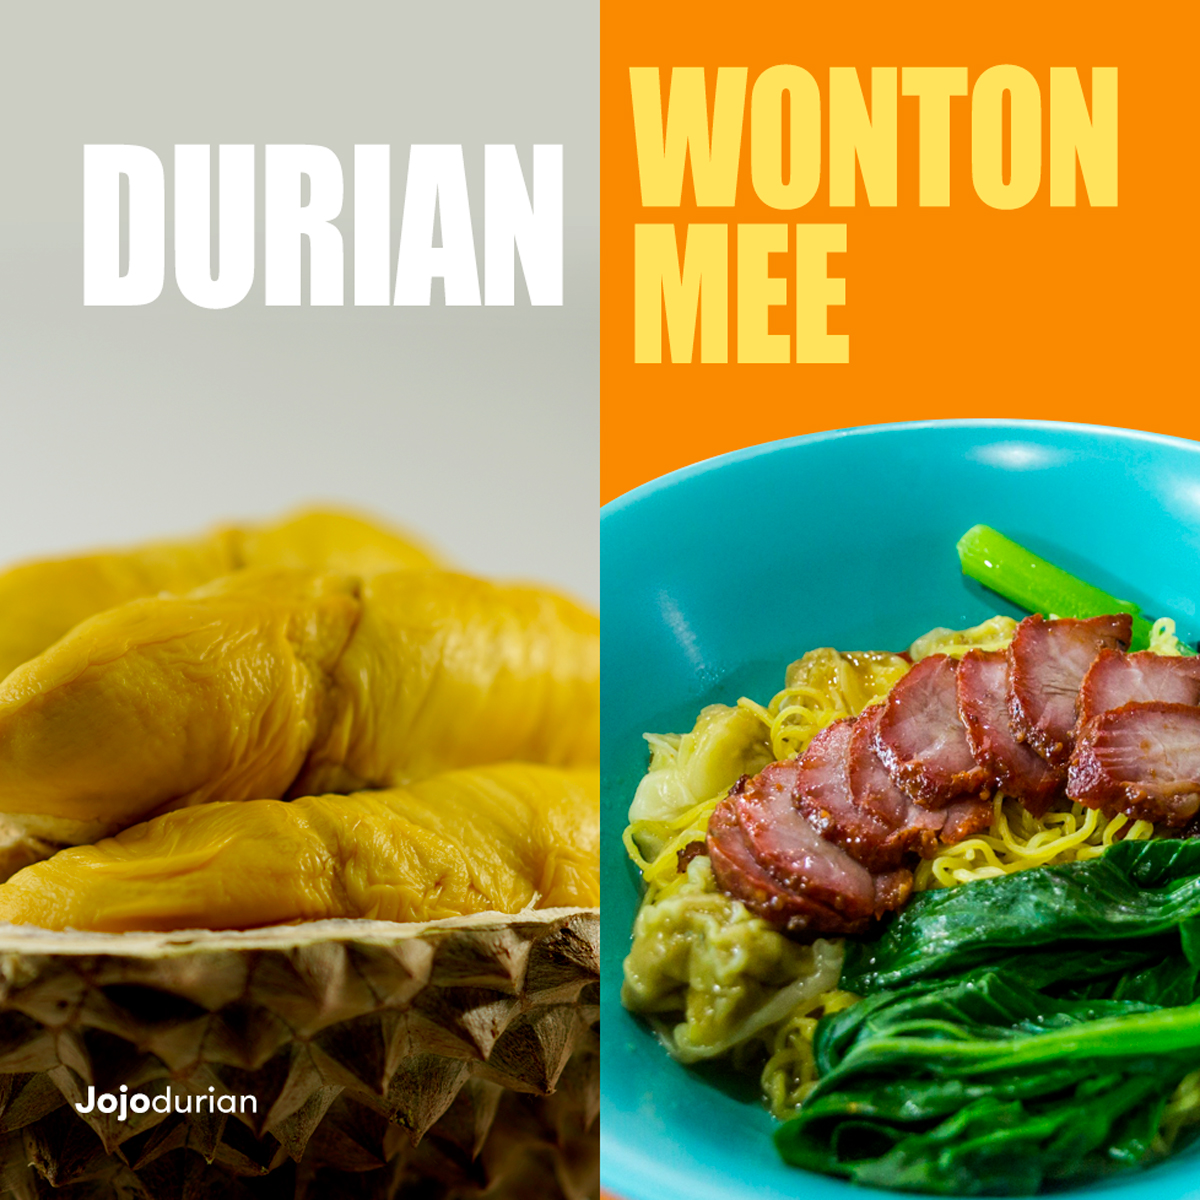 Meal Replacement durian wonton mee